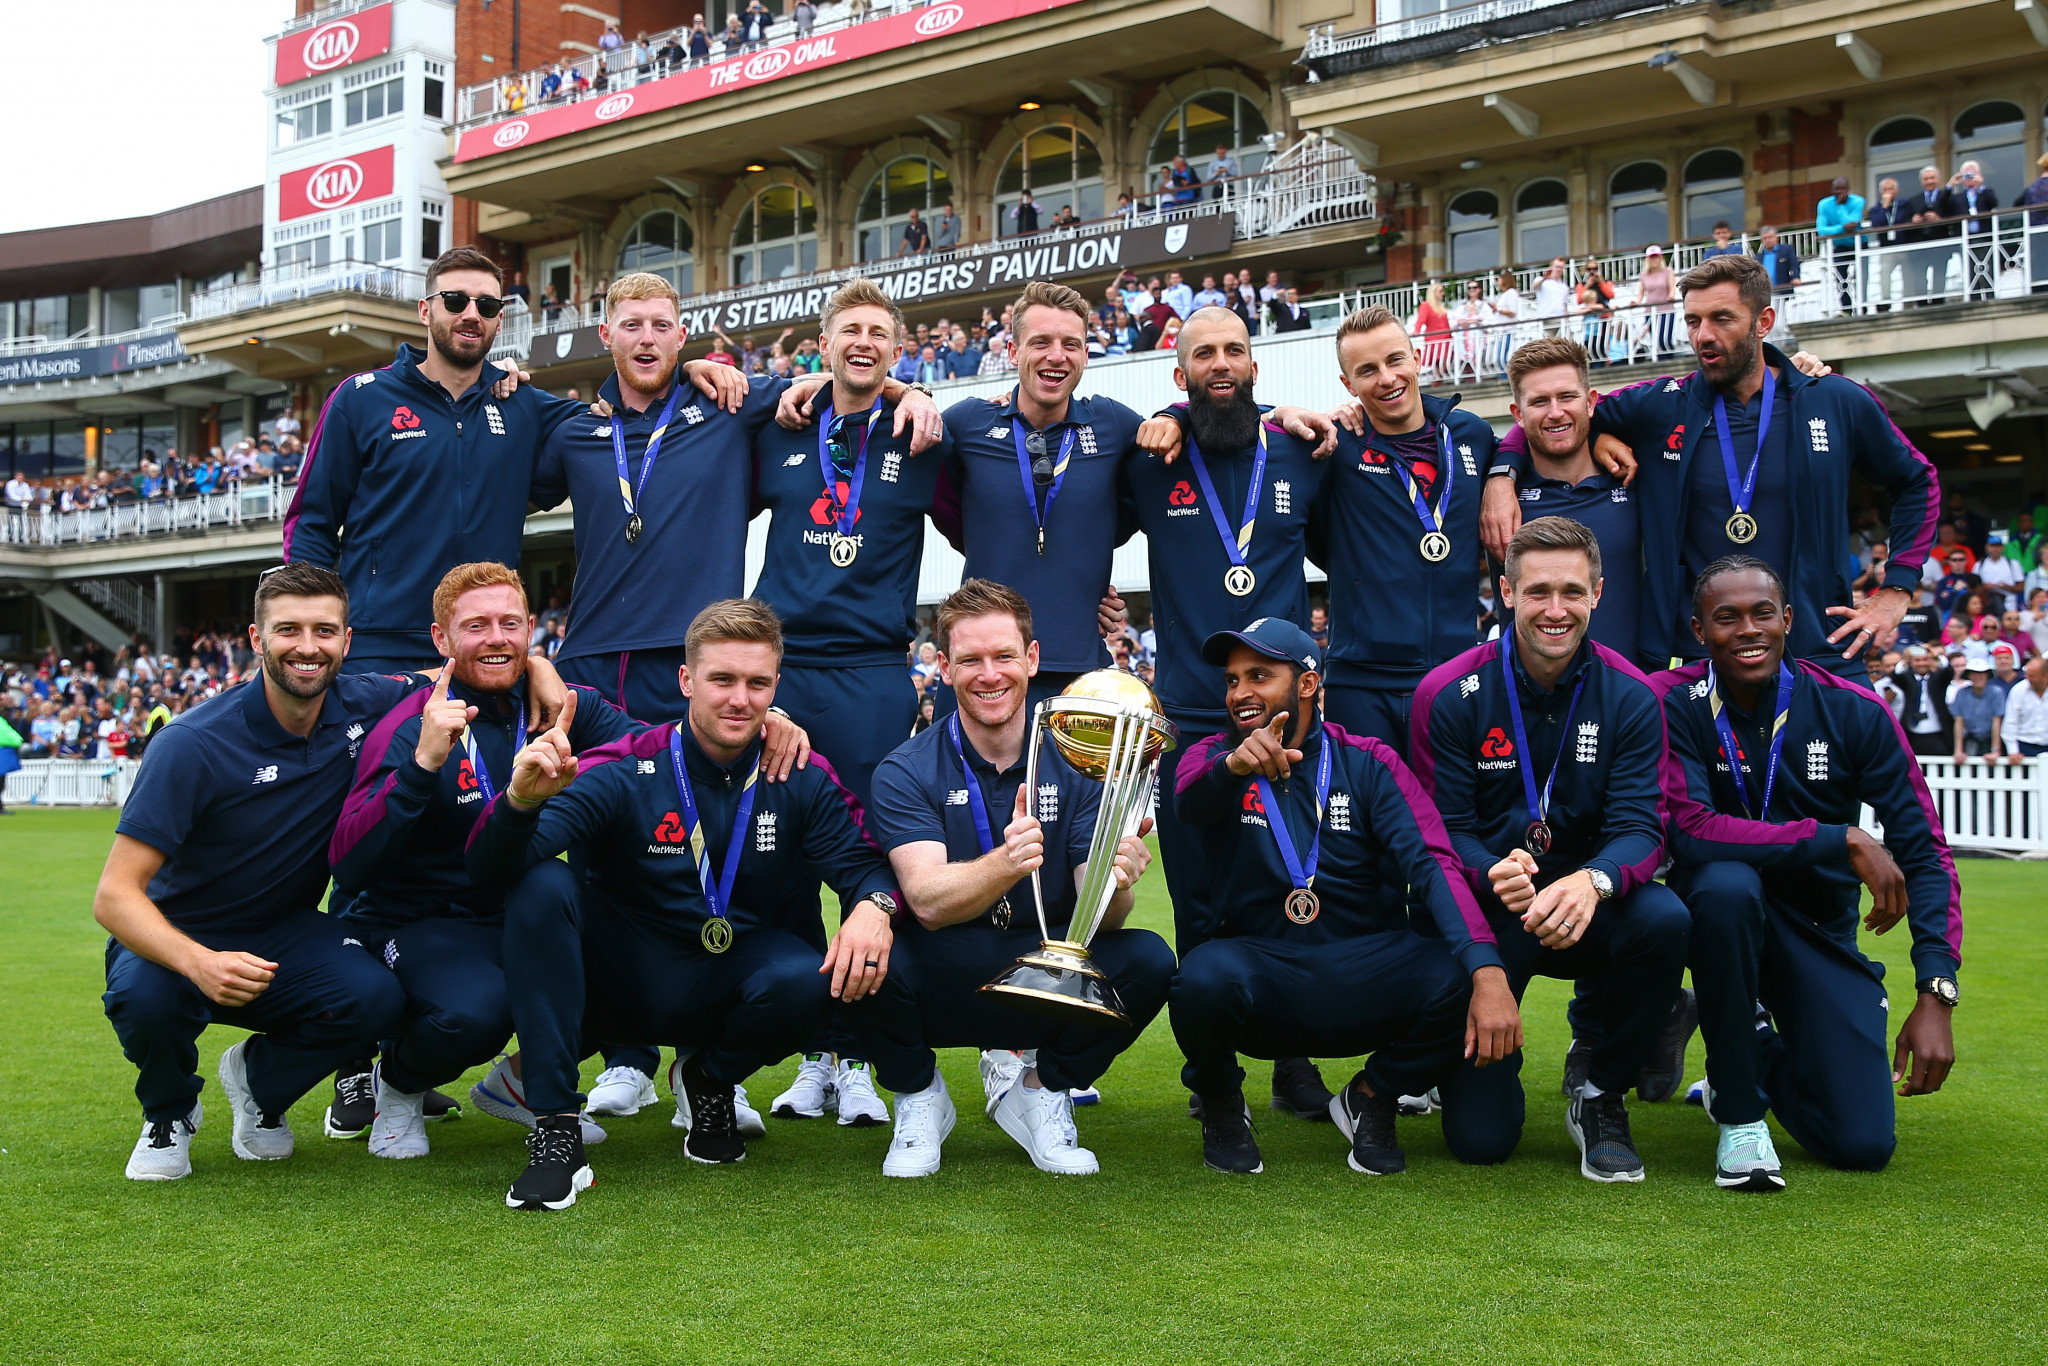 England won last year's Cricket World Cup in front of a home crowd ©Getty Images